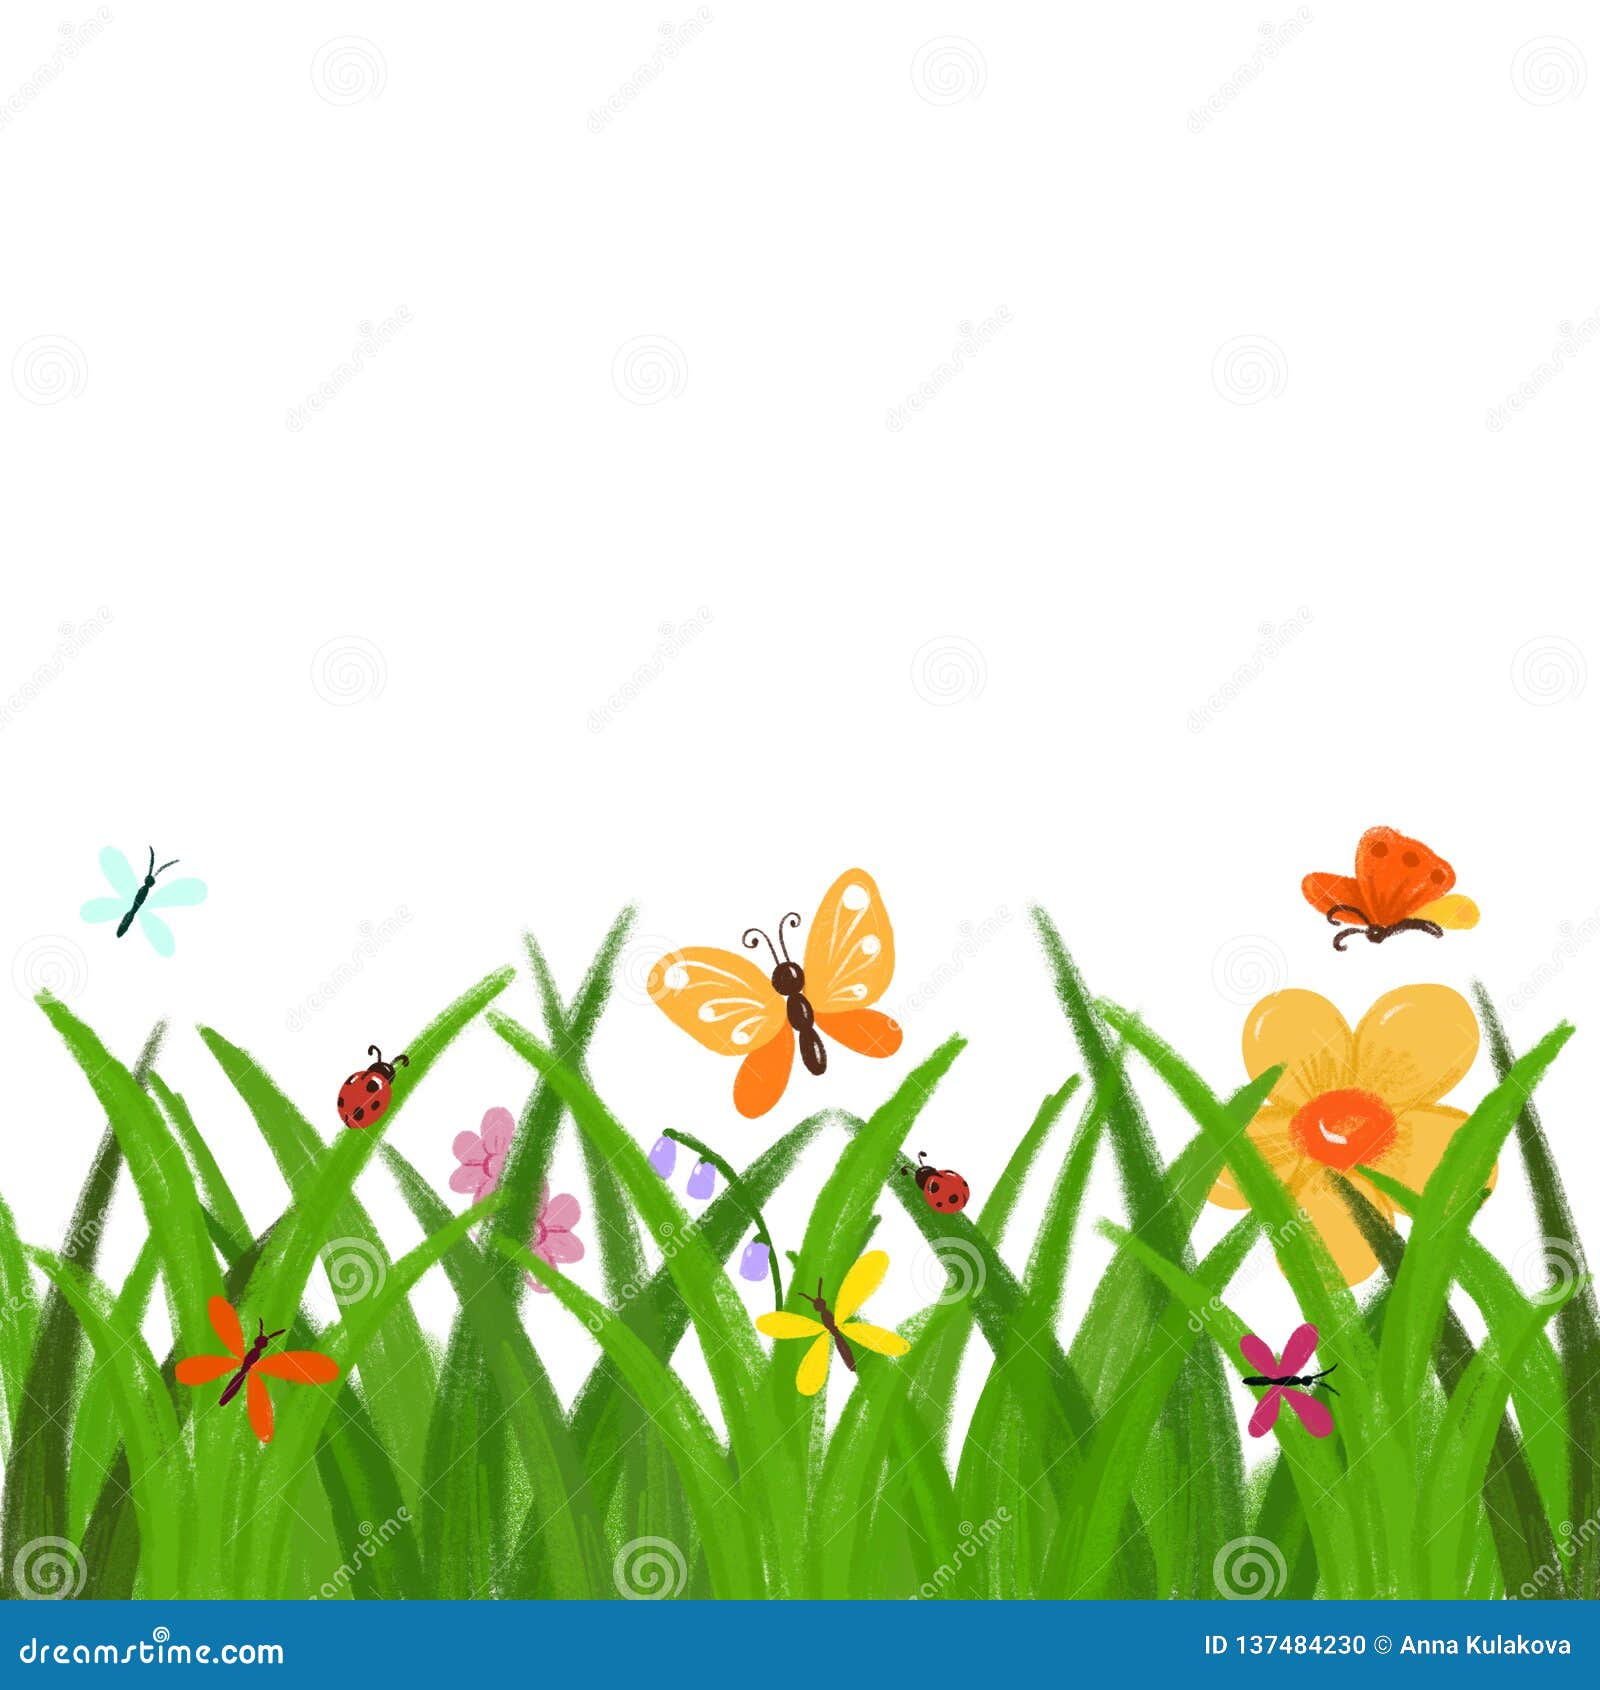 Spring Or Summer Hand Drawn Clip Art - Green Grass With ...